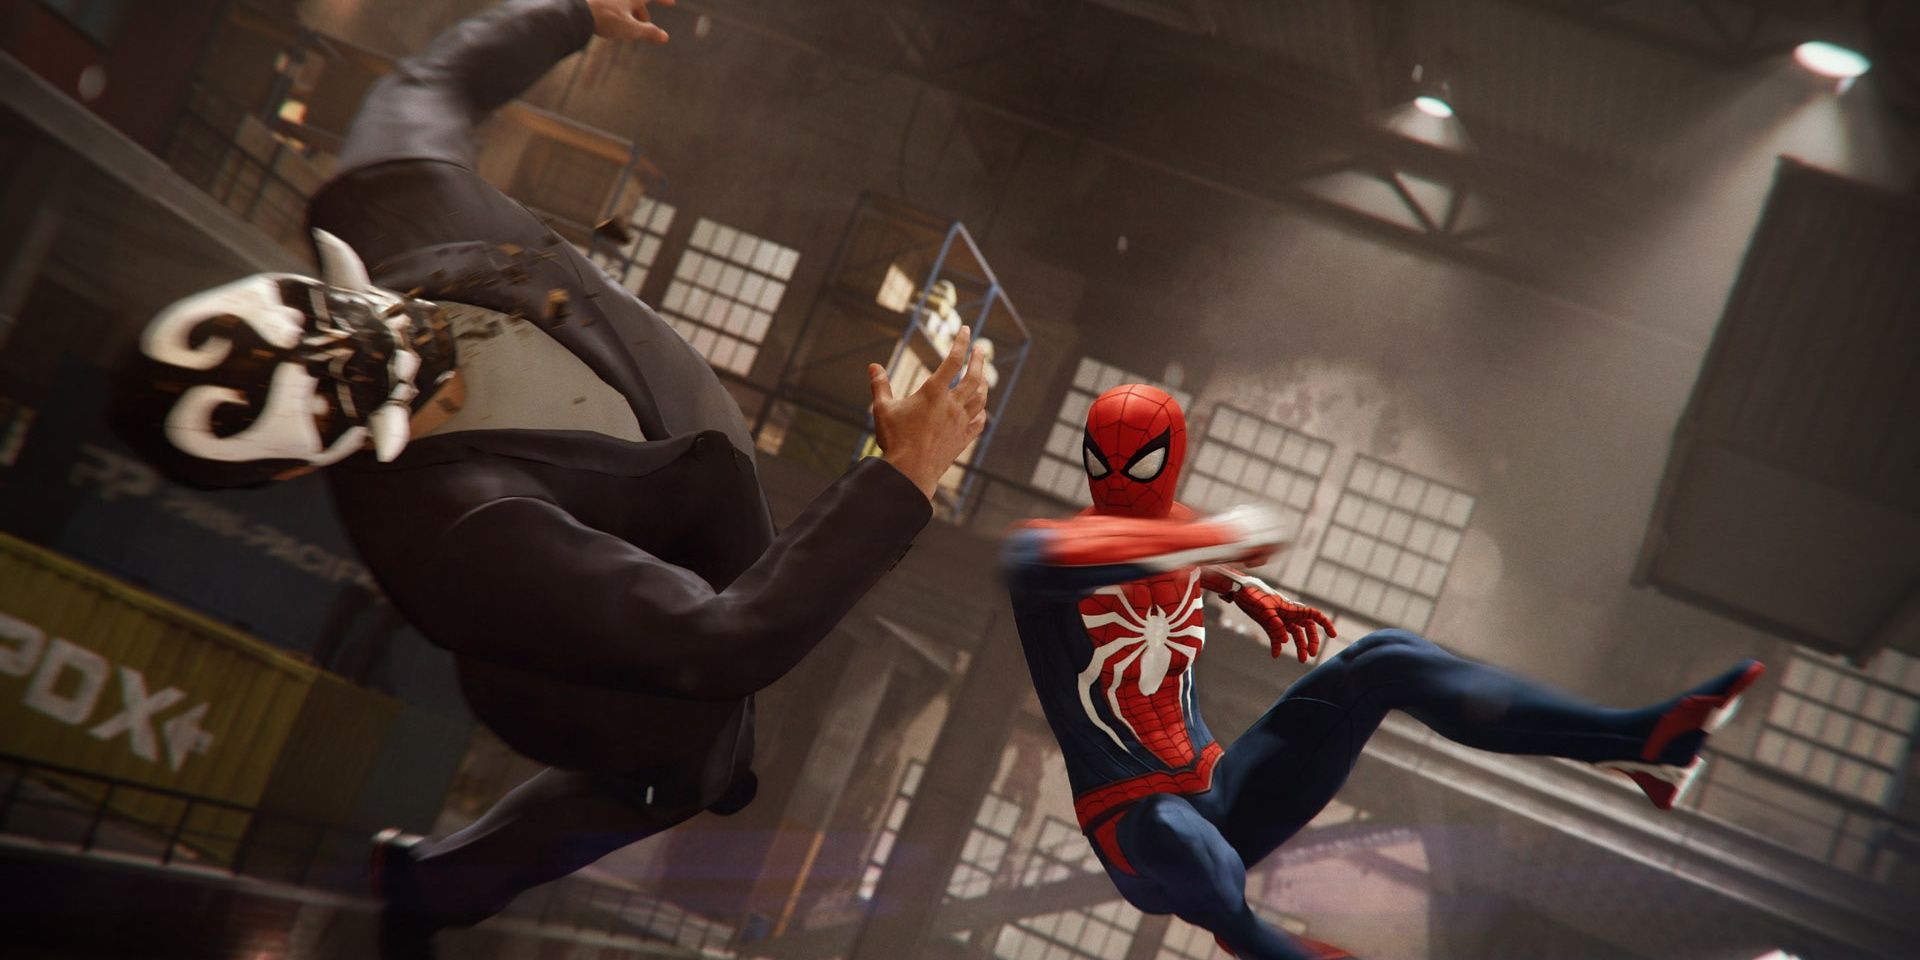 Spider-Man punches one of Mister Negative's goons